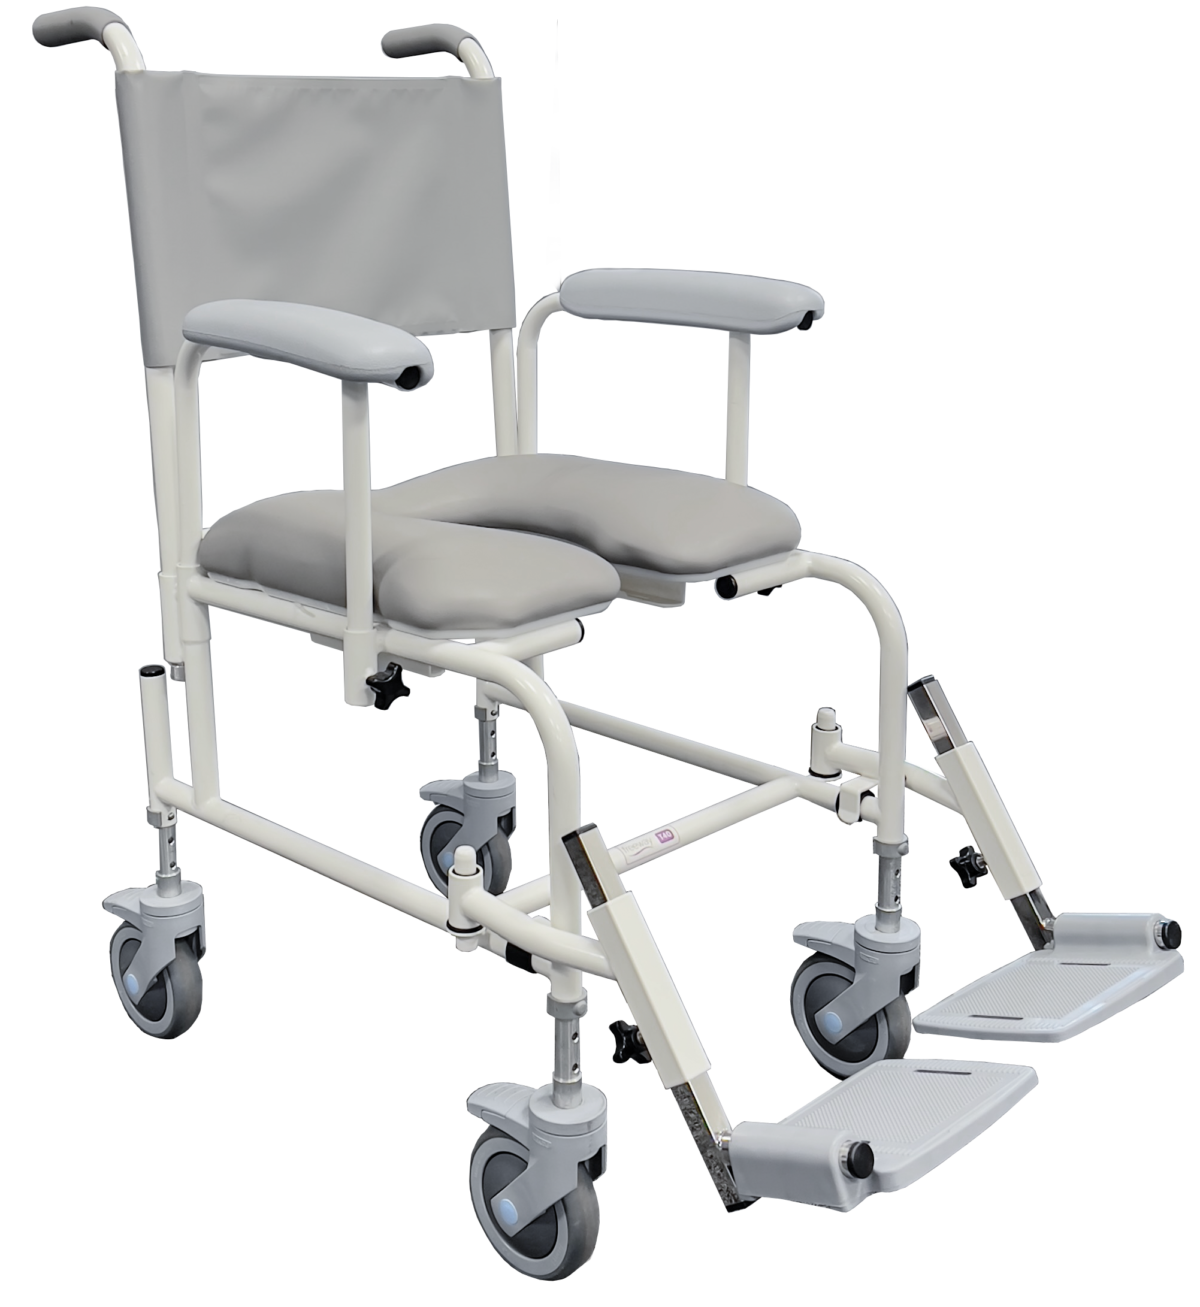 Freeway height adjustable shower chair diagonal view